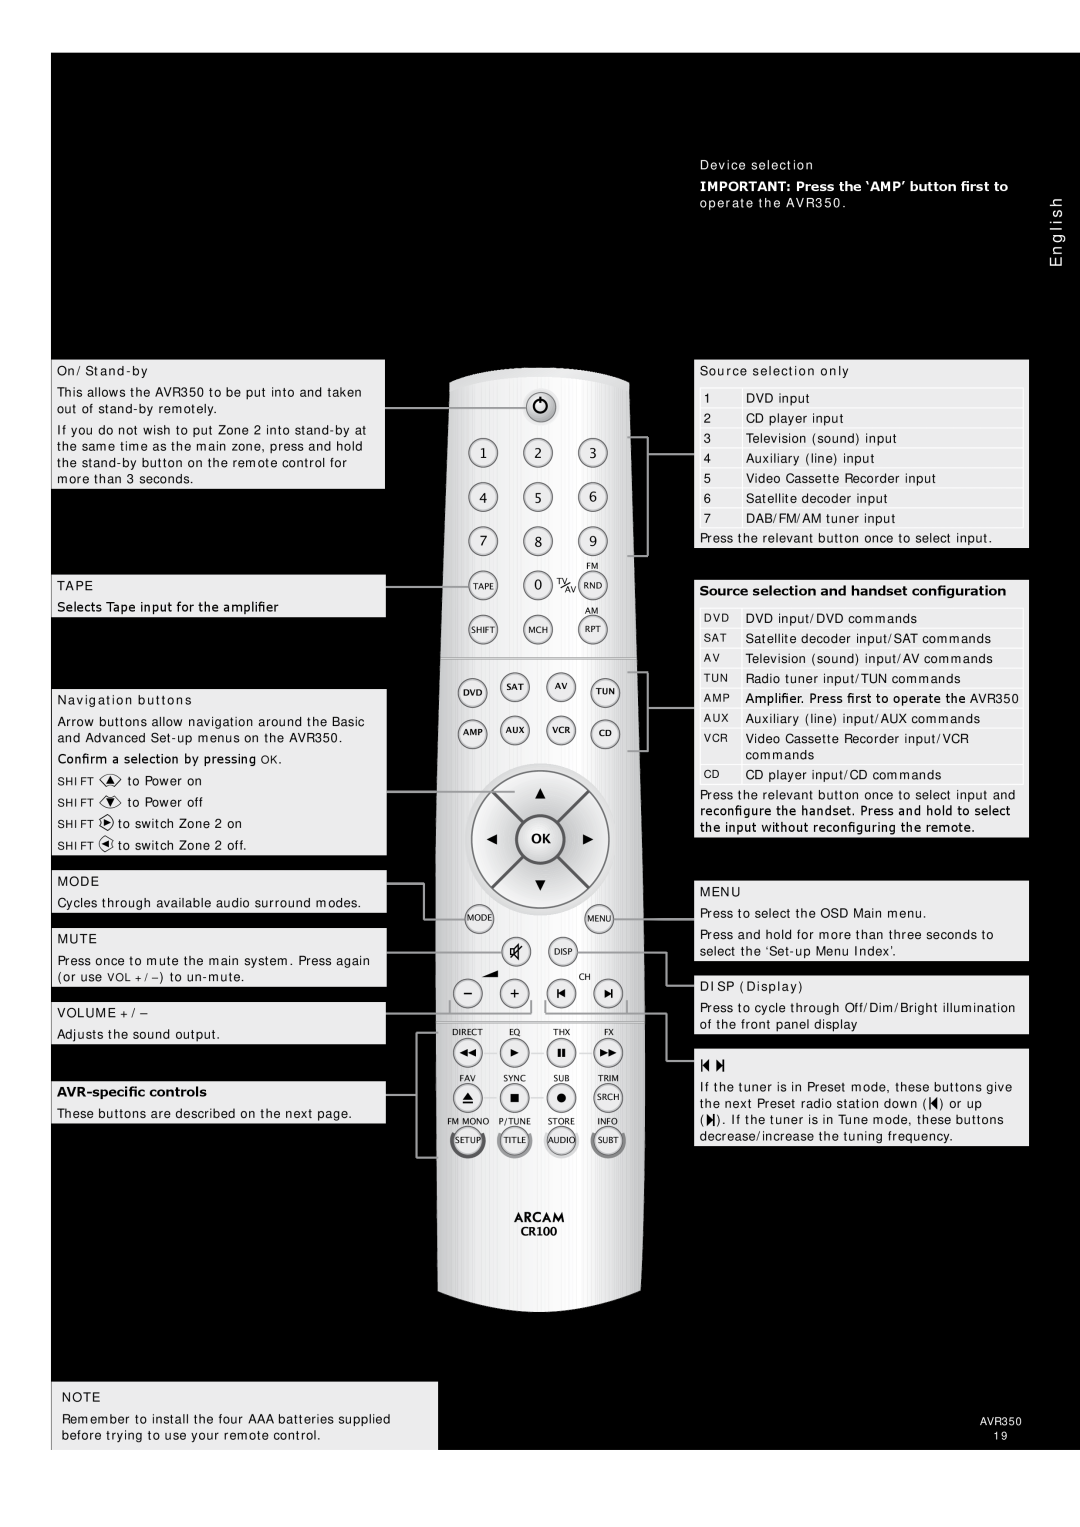 Arcam AVR350 manual CR100 Universal remote control, Device selection, IMPORTANT Press the ‘AMP’ button first to, English 